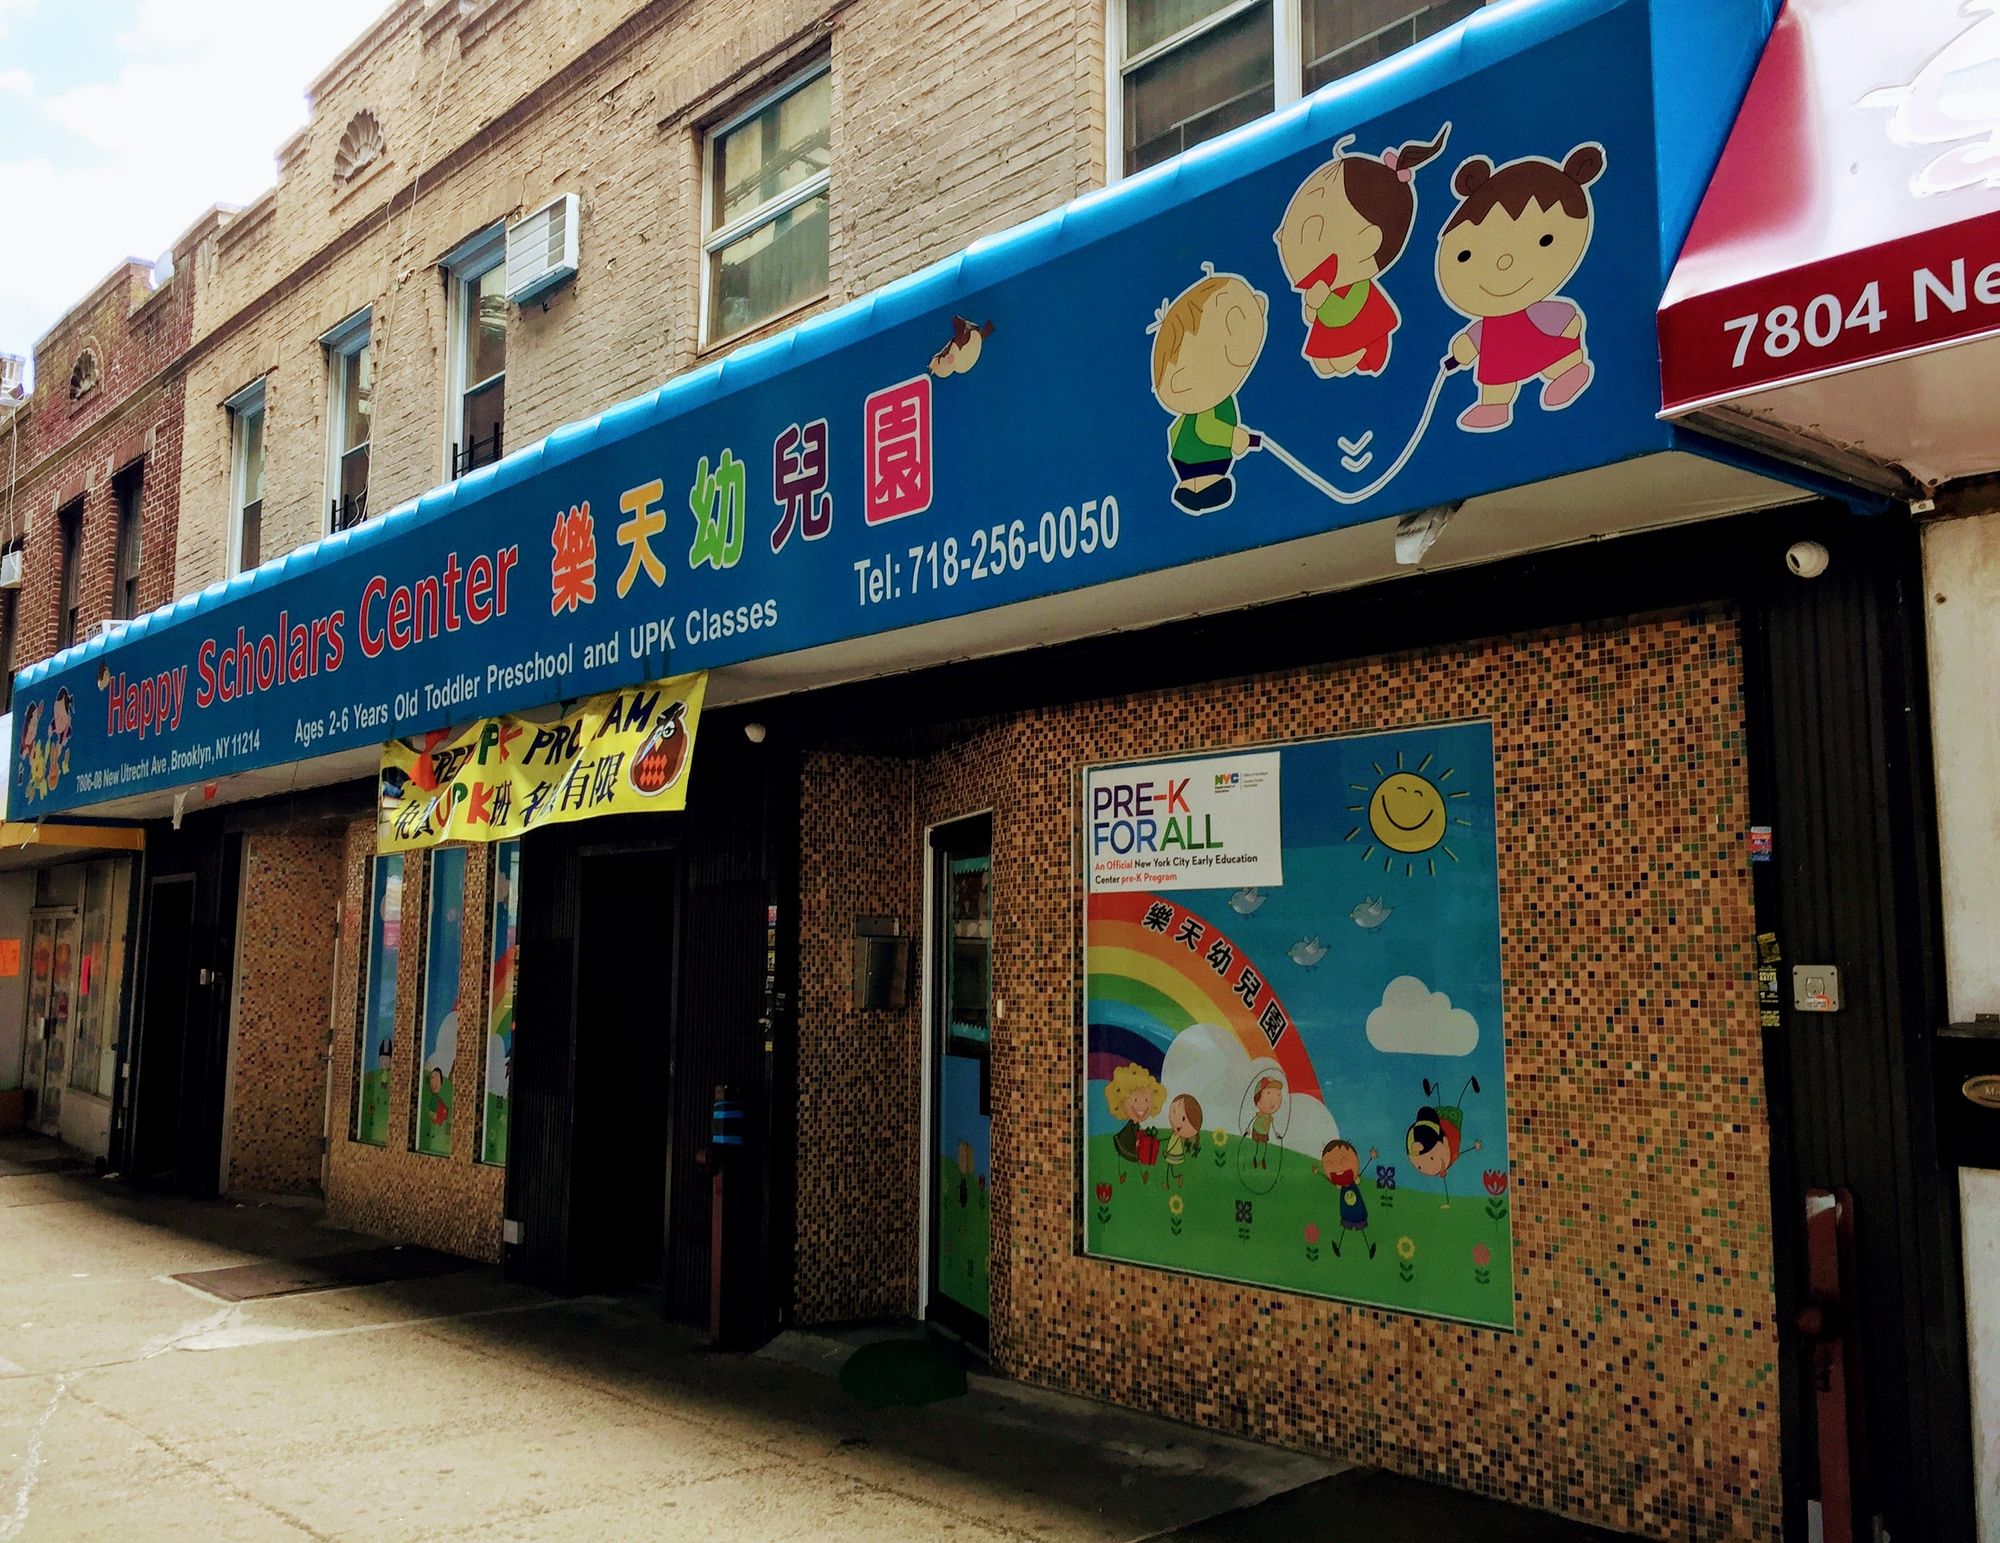 Families will need child care to reopen NYC, but preschools fear they won’t survive the coronavirus shutdown